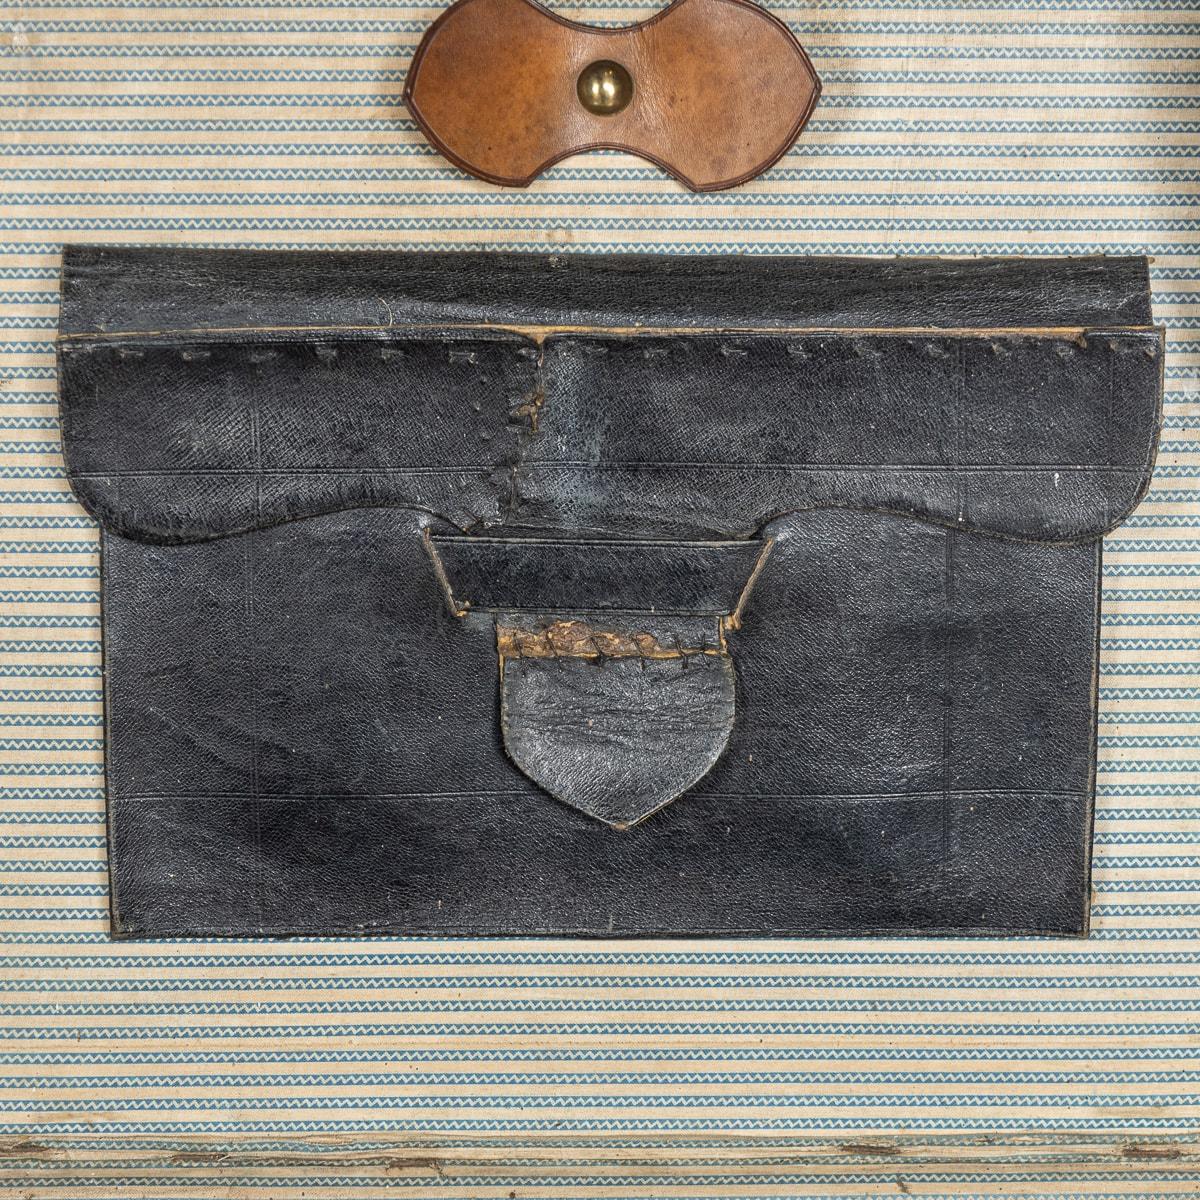 Antique 19th Century Victorian Leather Suitcase With Painted Crest c.1850 For Sale 3